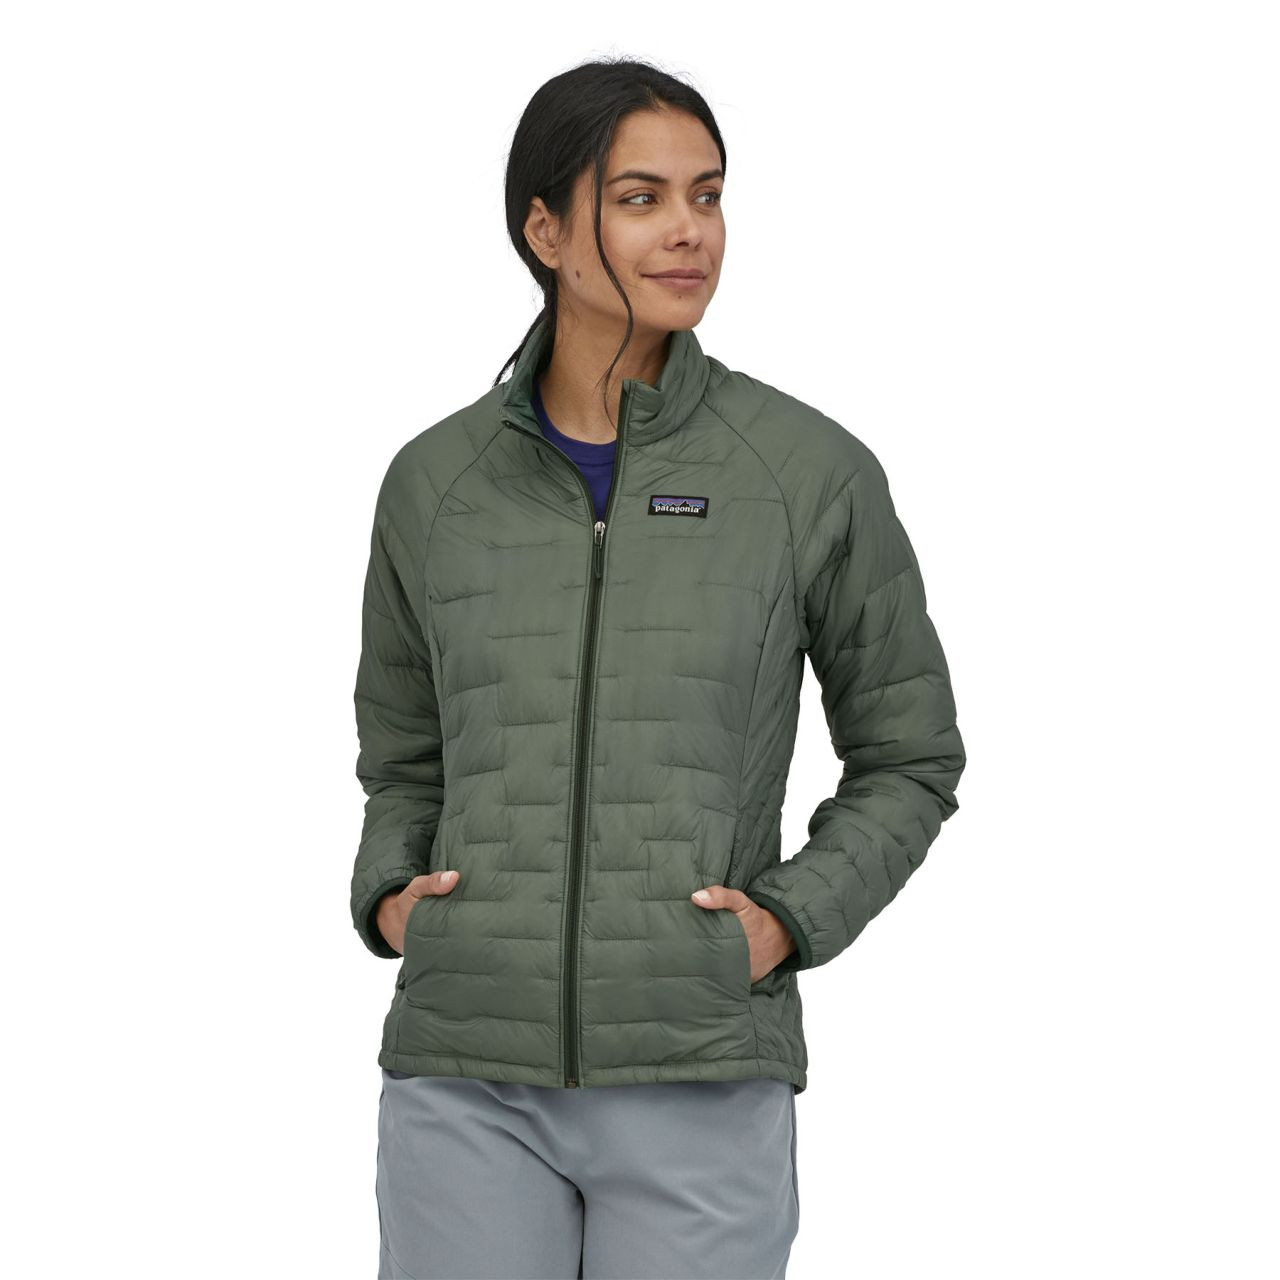 Patagonia Micro Puff Insulated Jacket - Women's